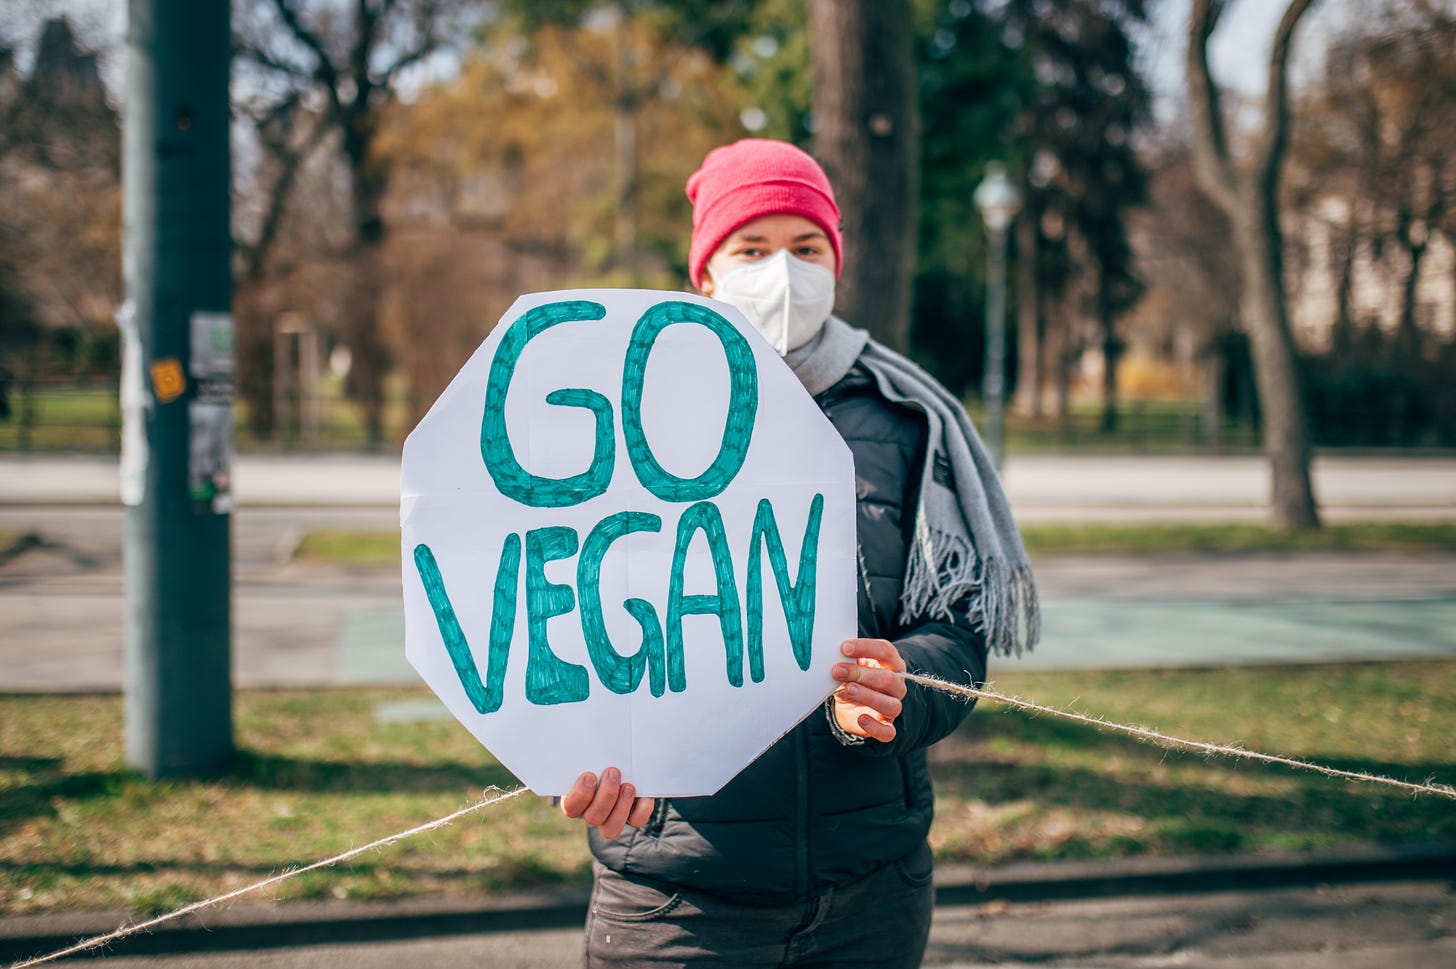 File:Demonstrator with a sign that reads "Go Vegan" at a protest against  climate change (51059102481).jpg - Wikipedia